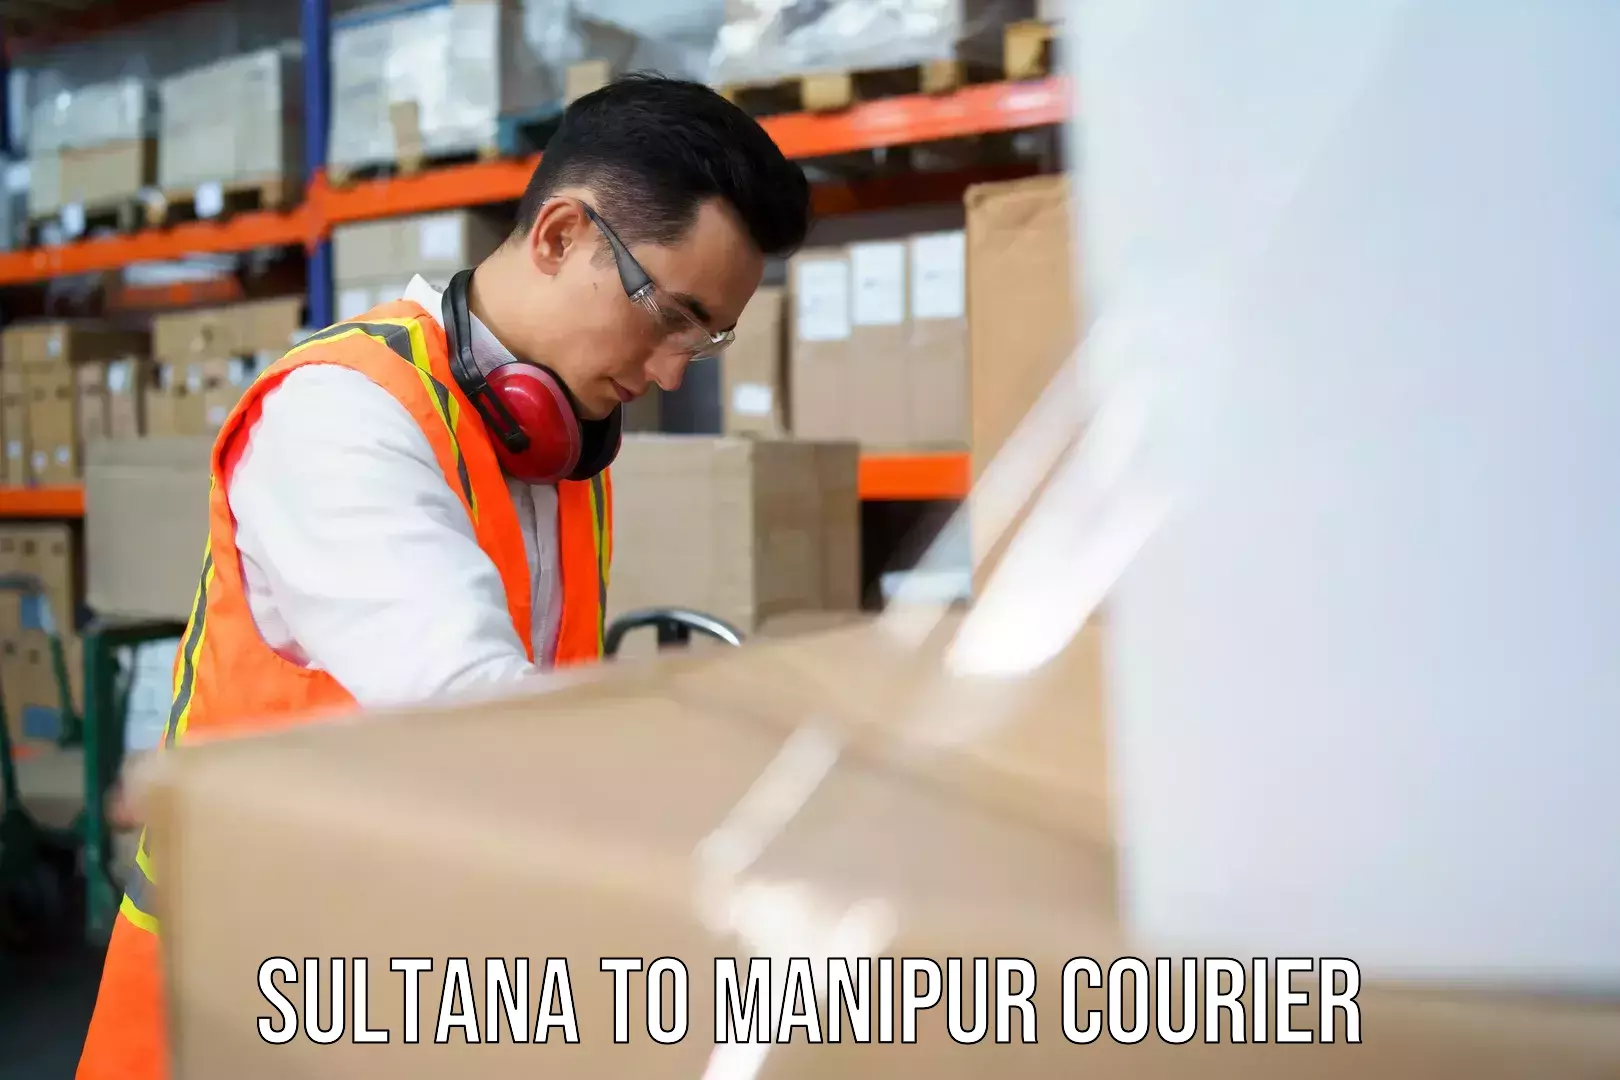 Local delivery service Sultana to Manipur